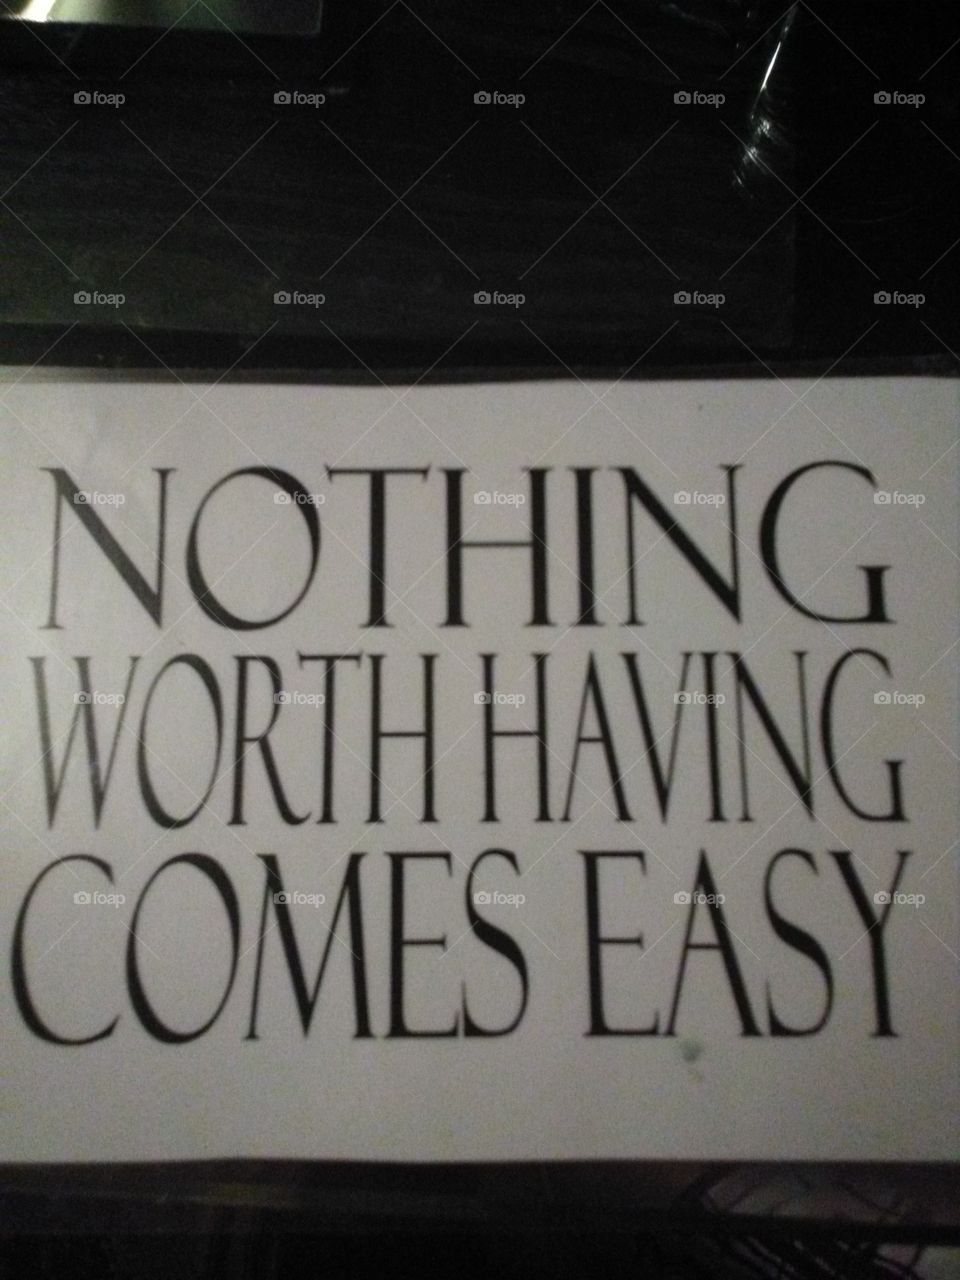 Nothing worth having comes easy, poster of mine.